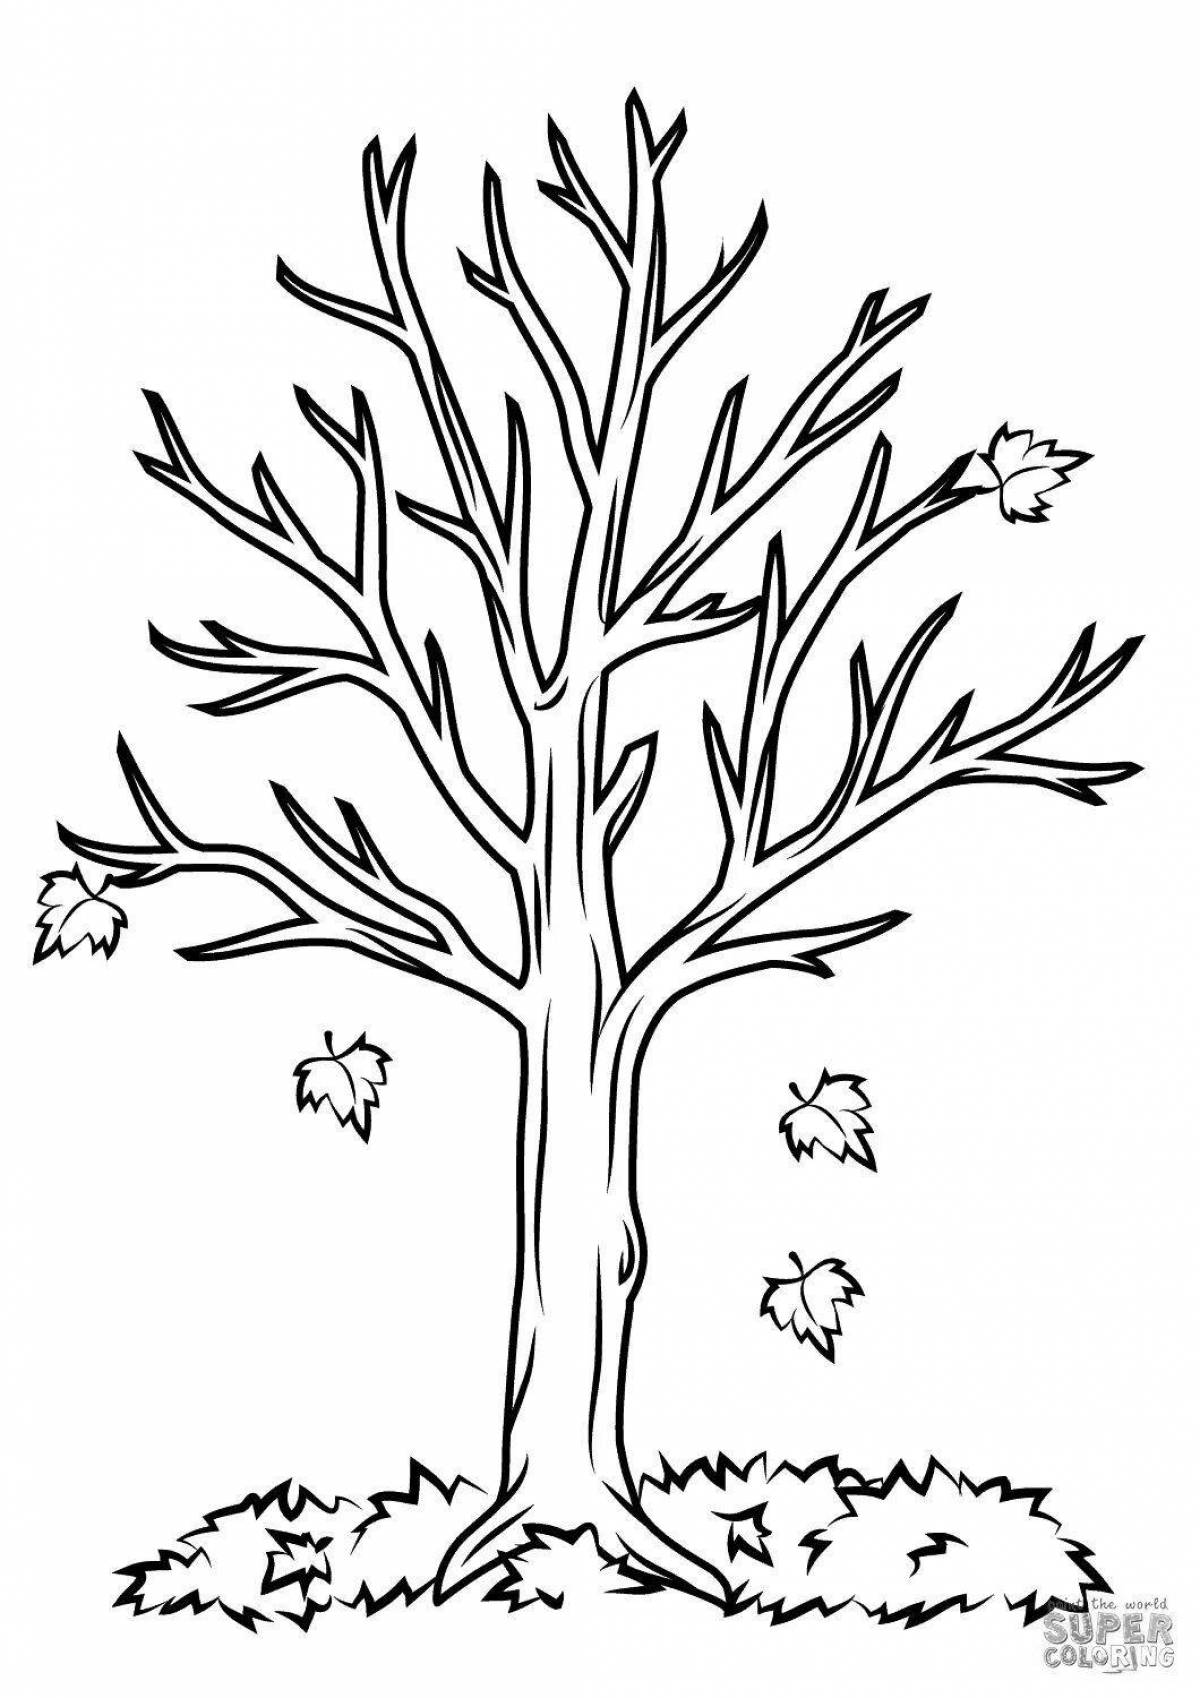 Fantastic tree coloring book for 4-5 year olds